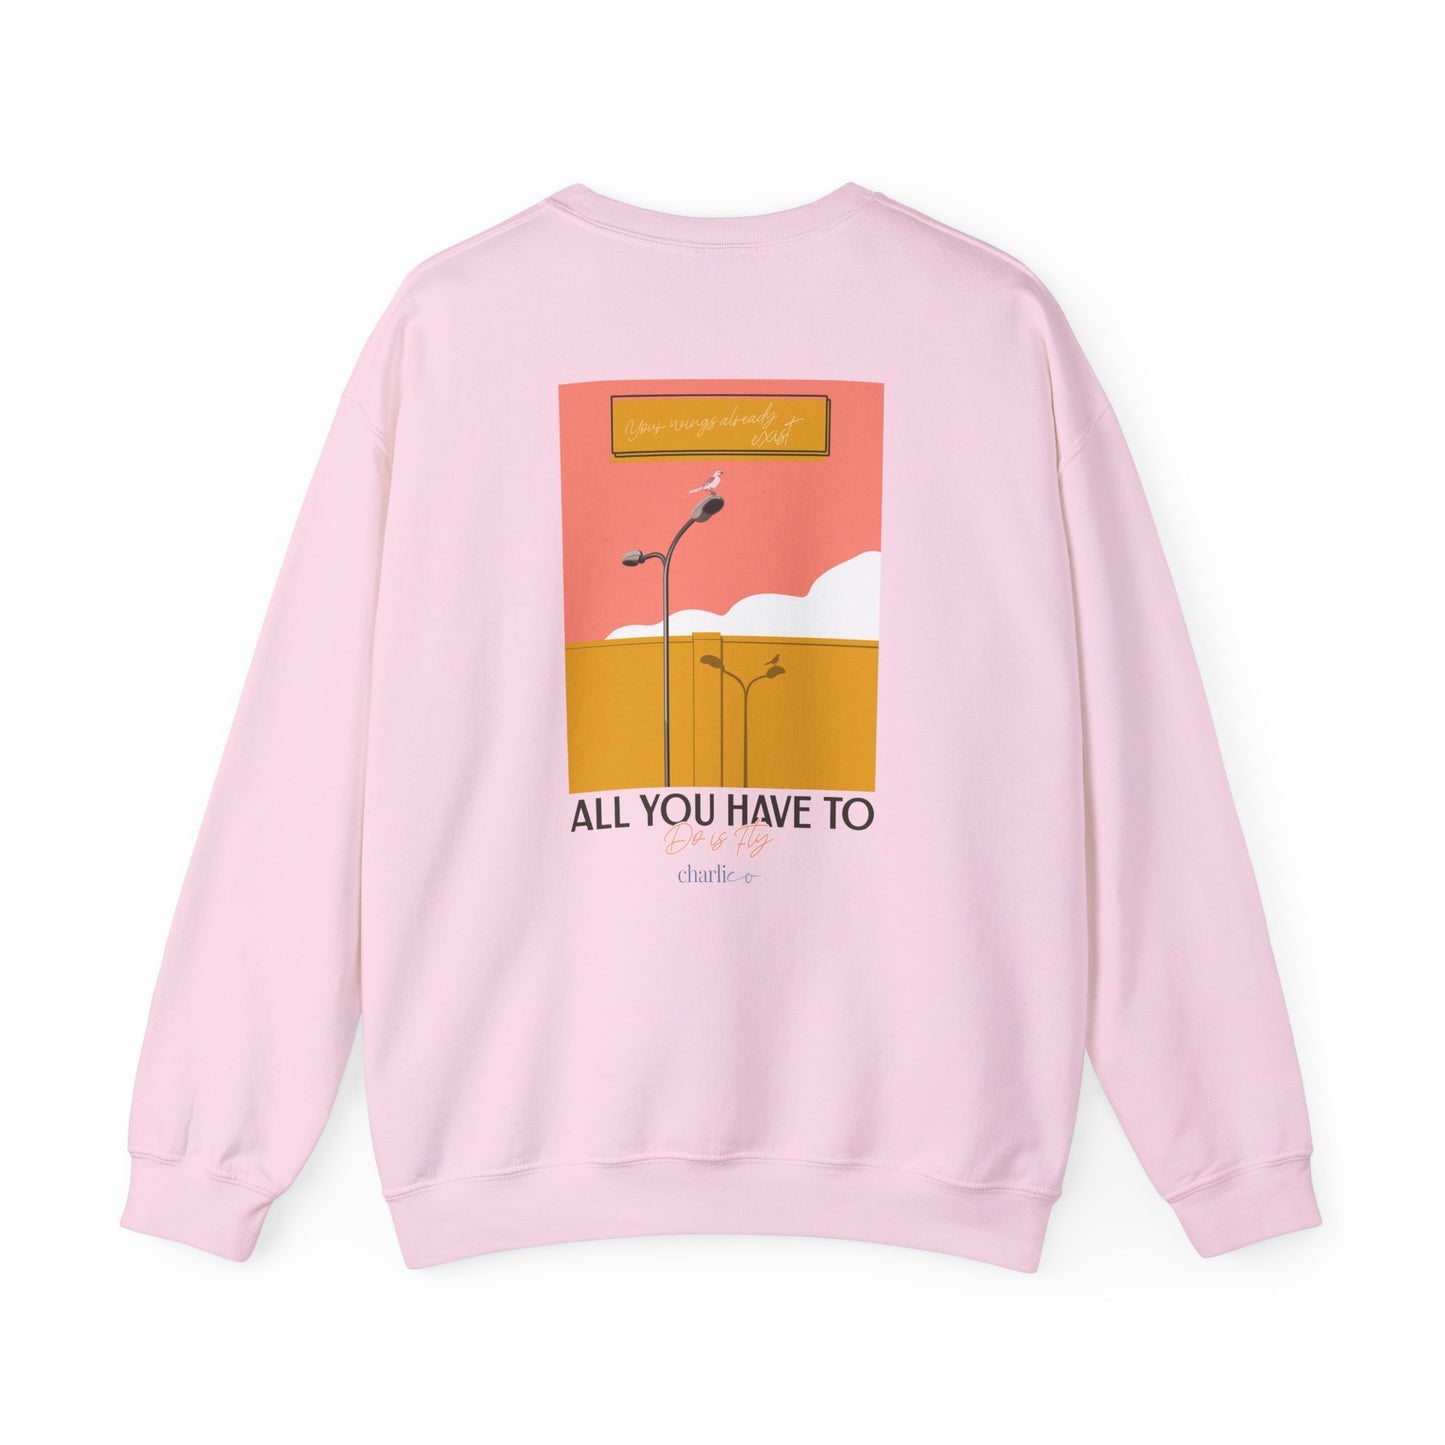 Crewneck sweatshirt -all you have to do is FLY- for adults